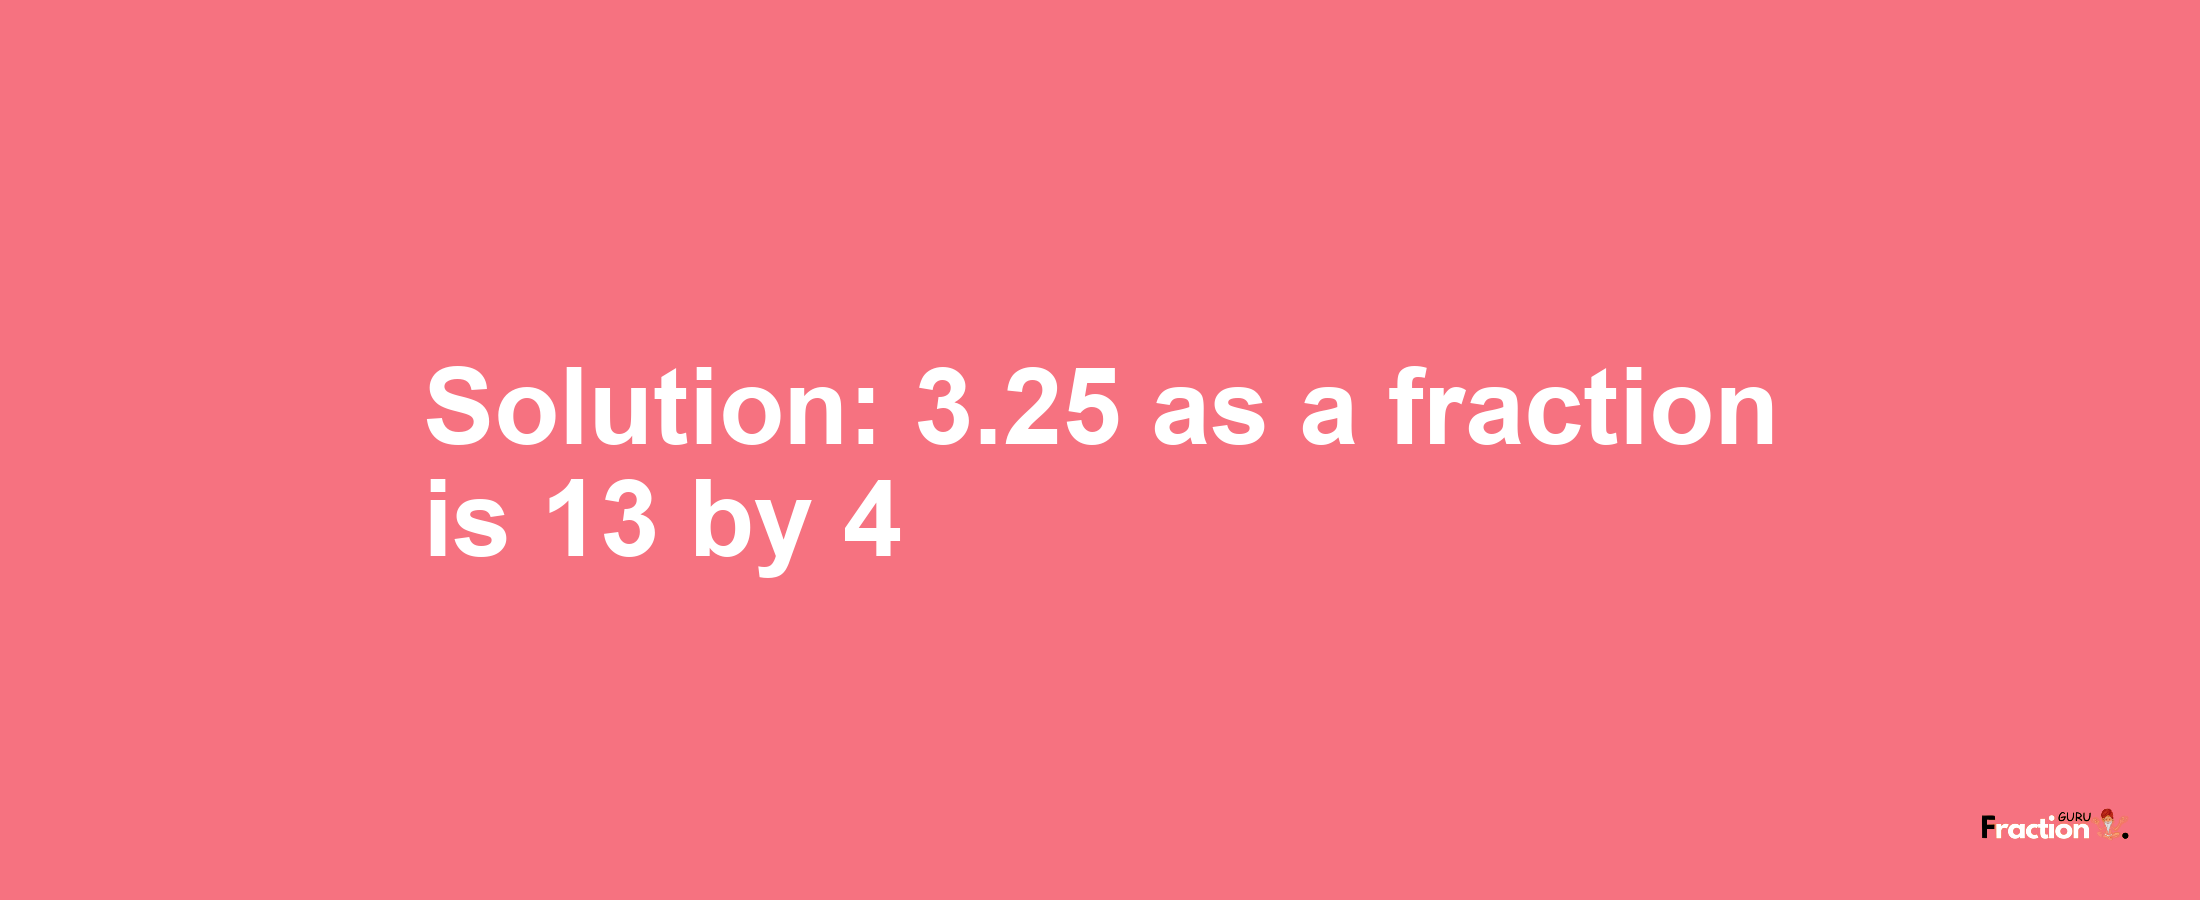 Solution:3.25 as a fraction is 13/4